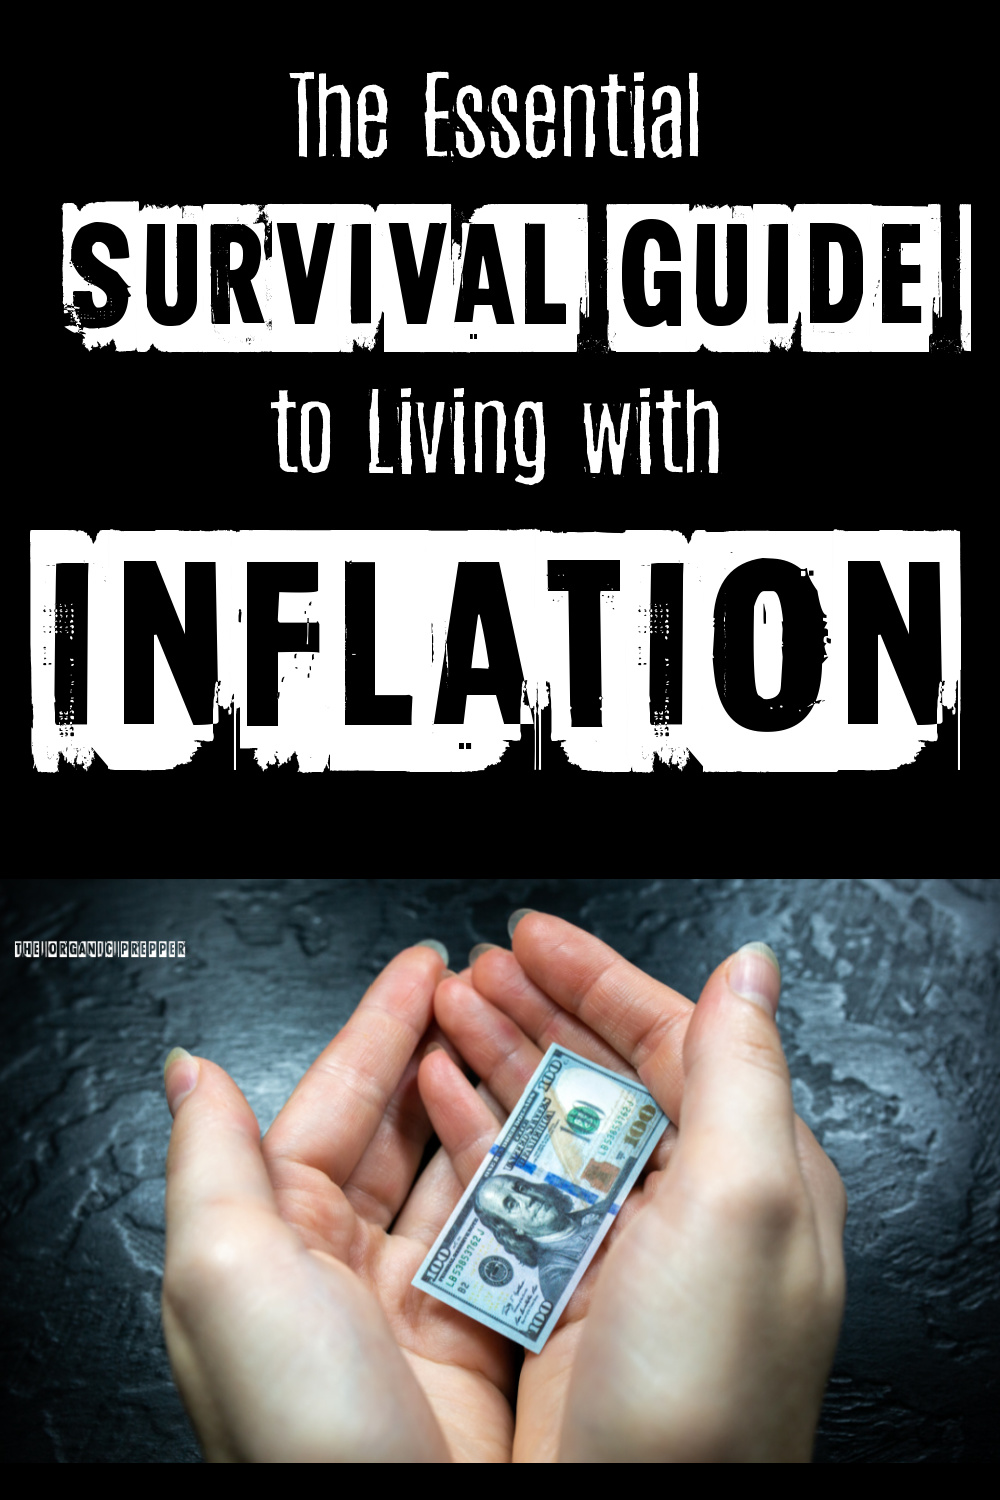 The Essential Survival Guide to Living with Inflation